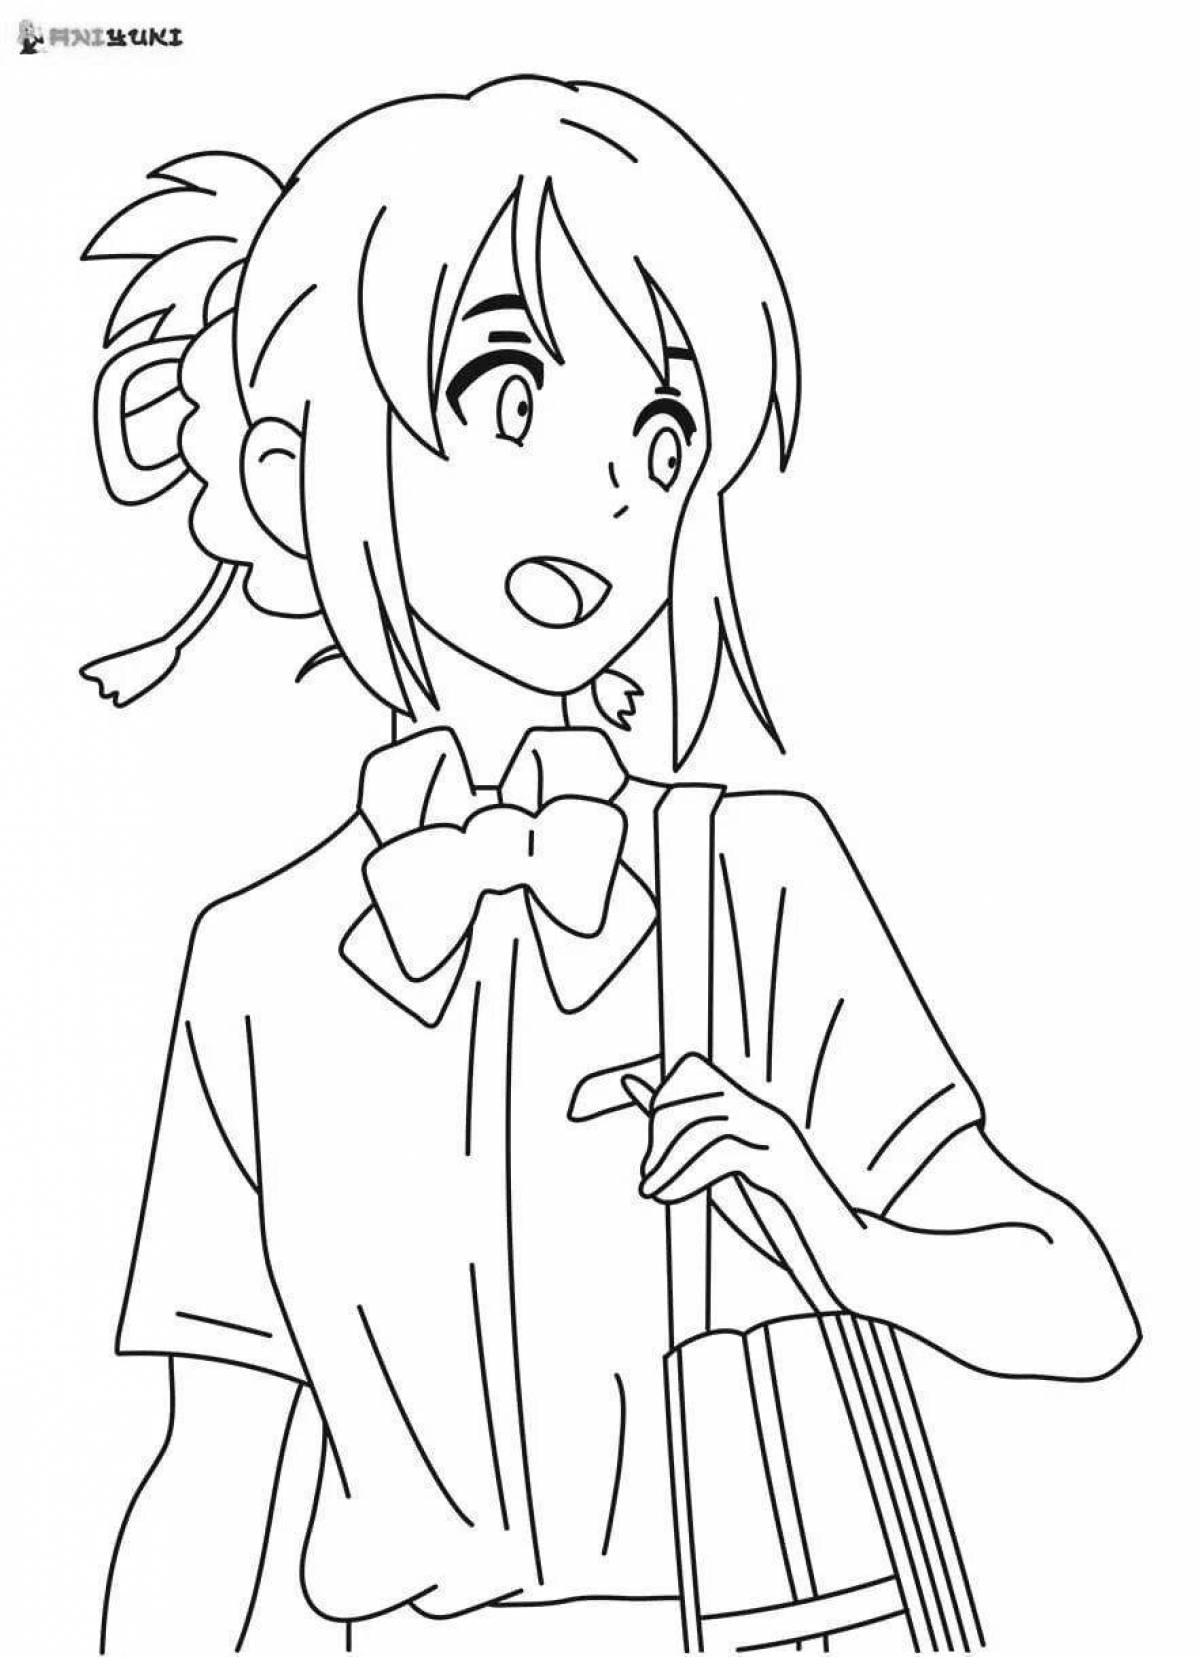 Ibis paint coloring page